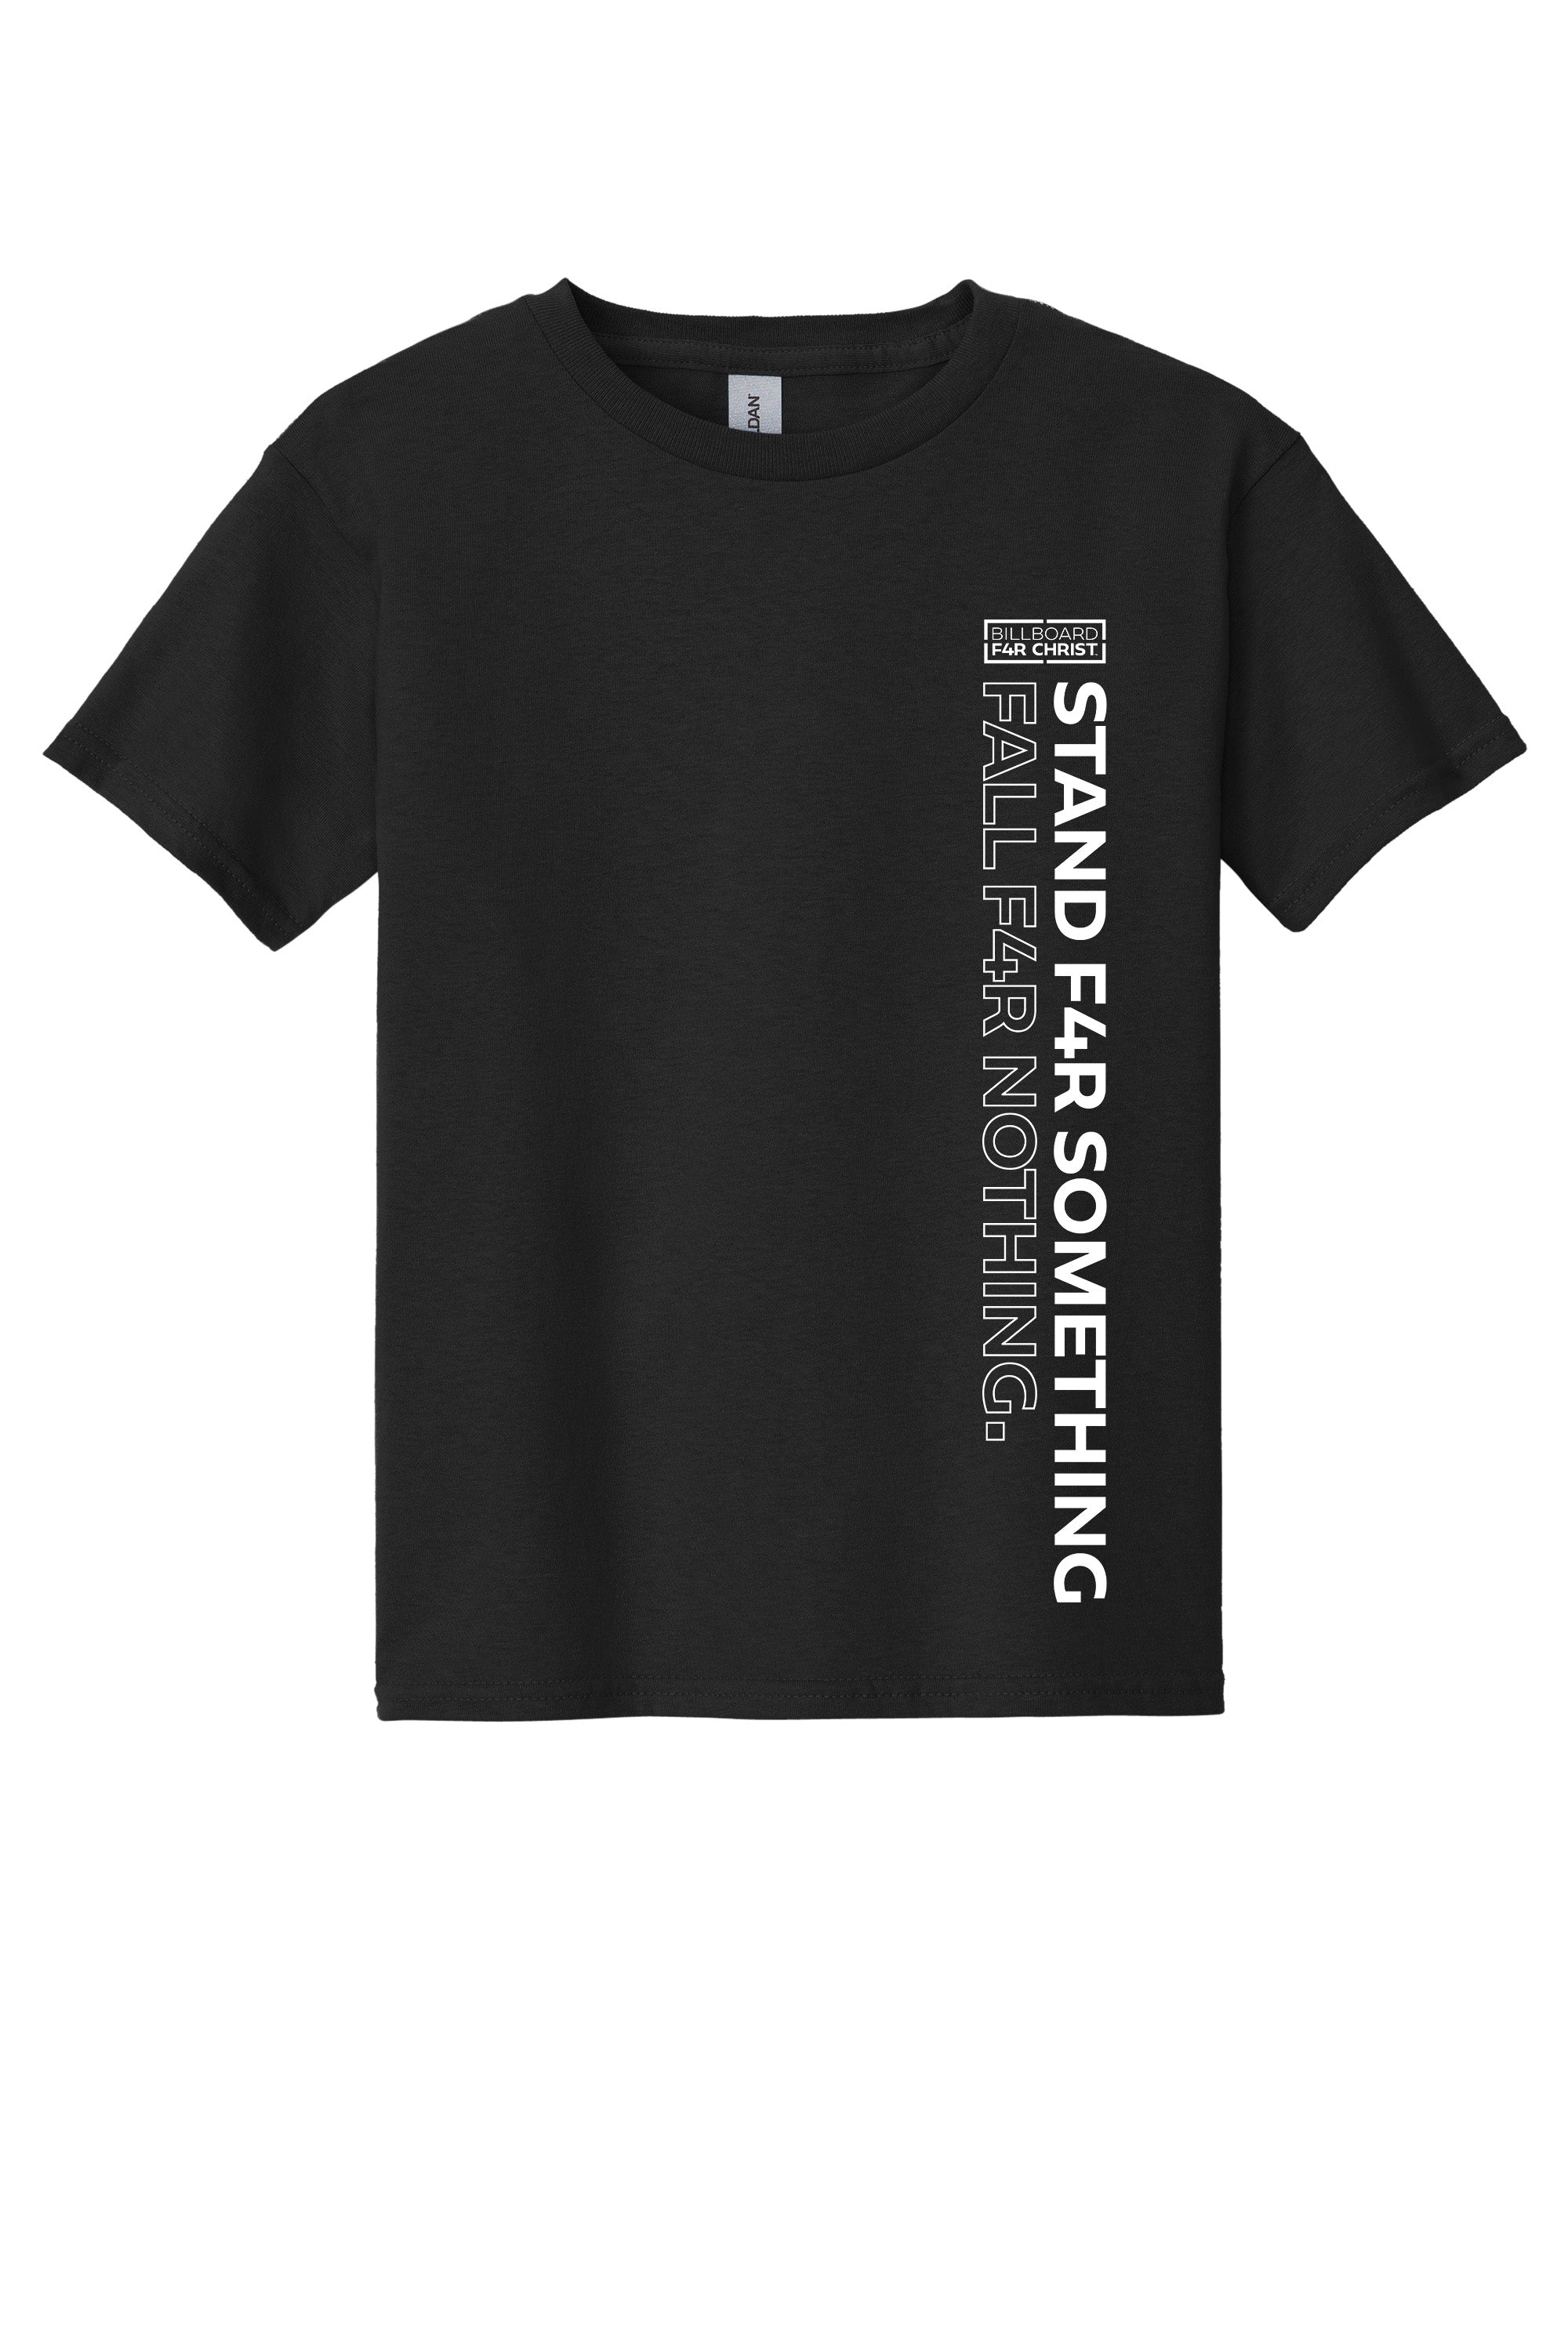 Stand F4R Something Youth T-Shirt